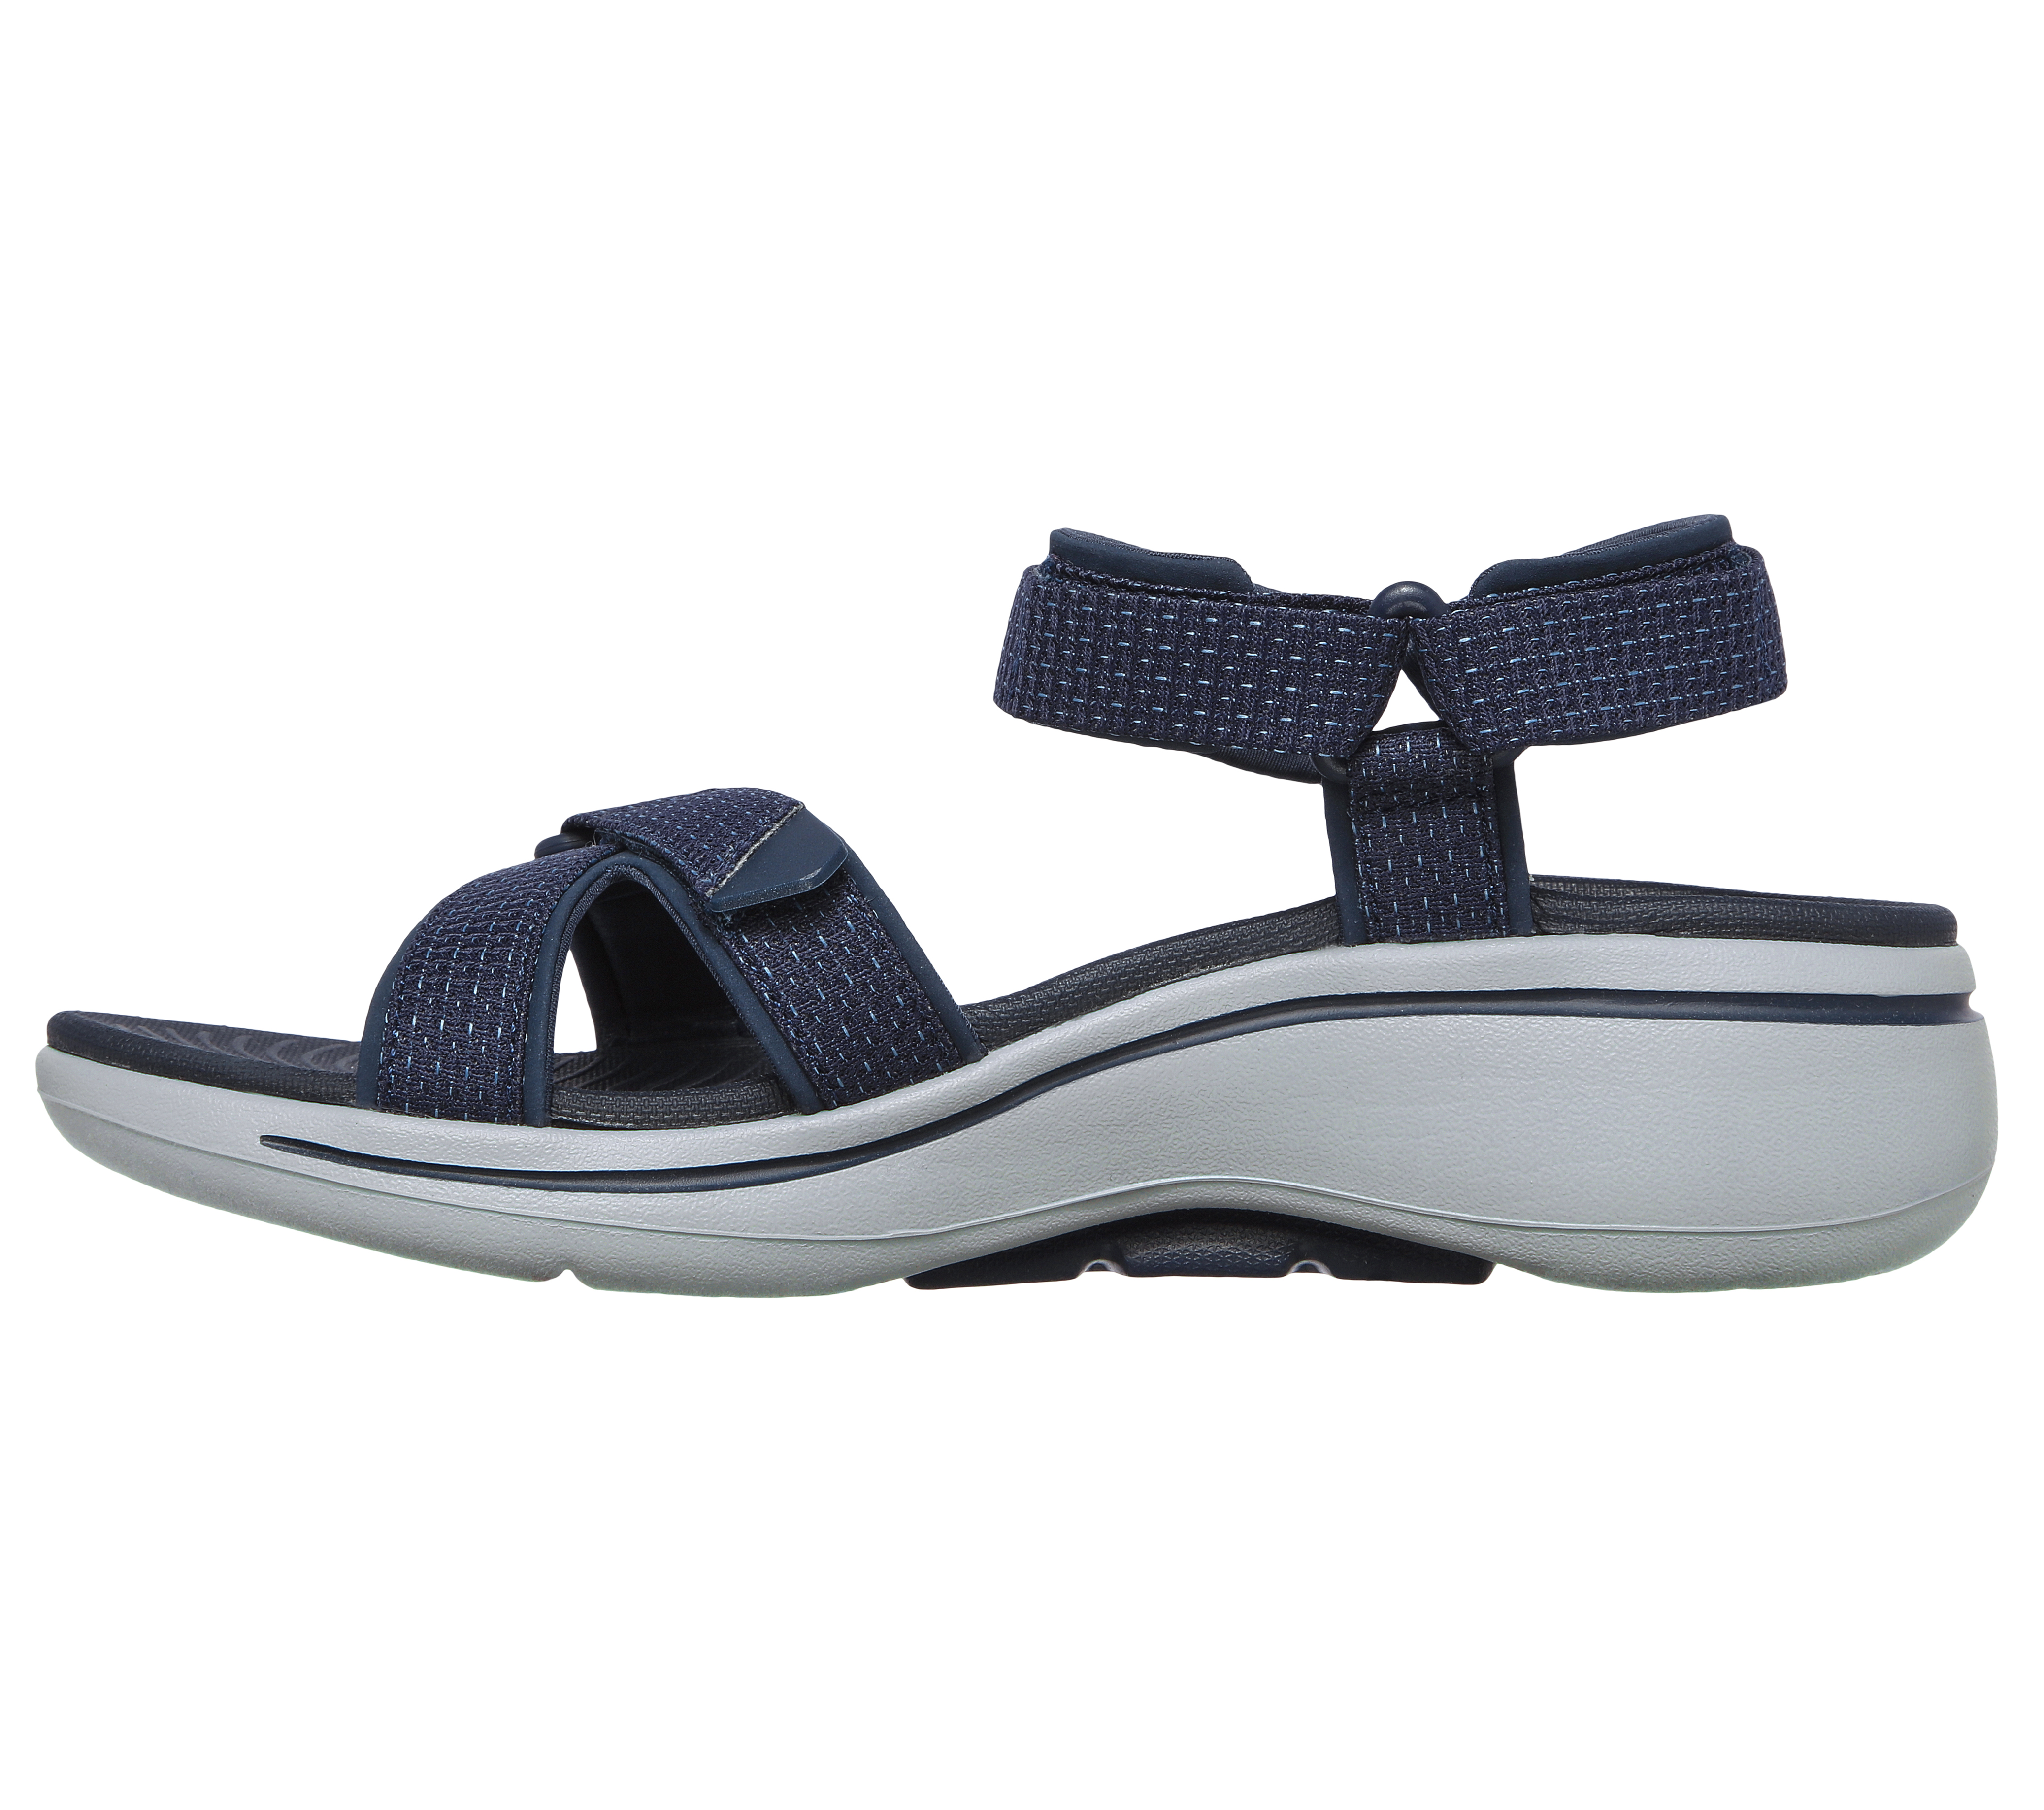 Shop the Arch Fit - Cruise Around SKECHERS